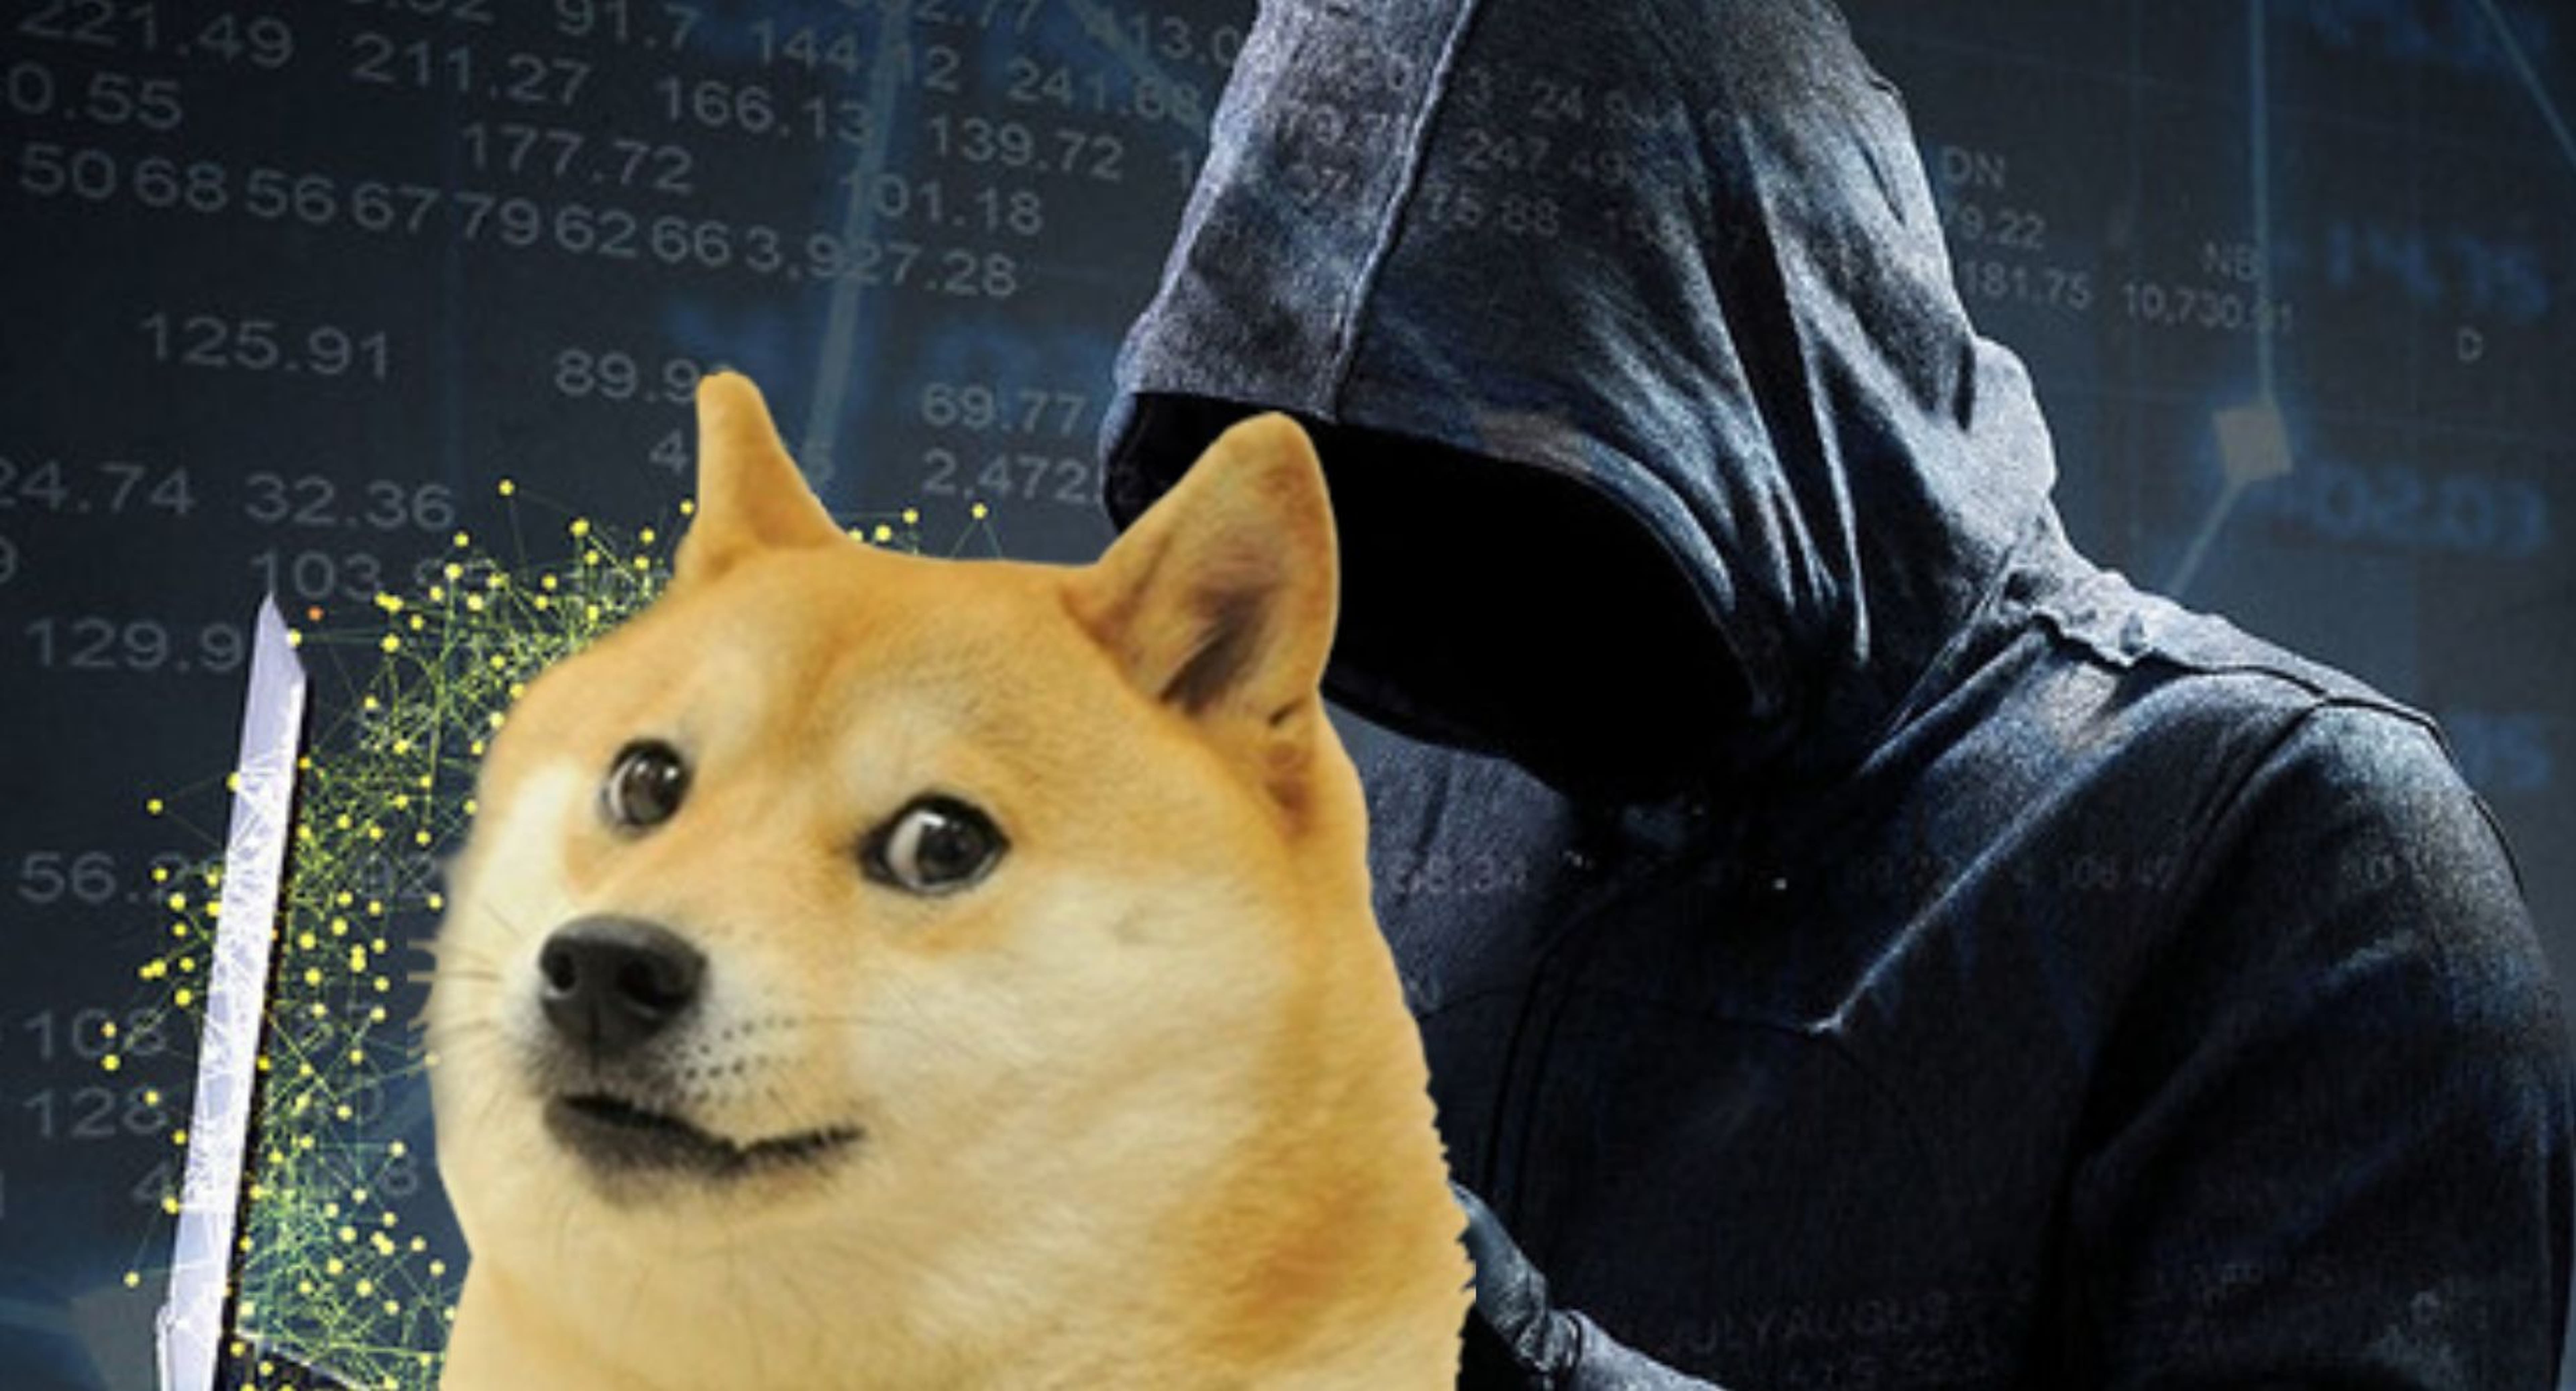 Millions Of Dogecoin Linked To Terrorism, Illicit Activities: Report